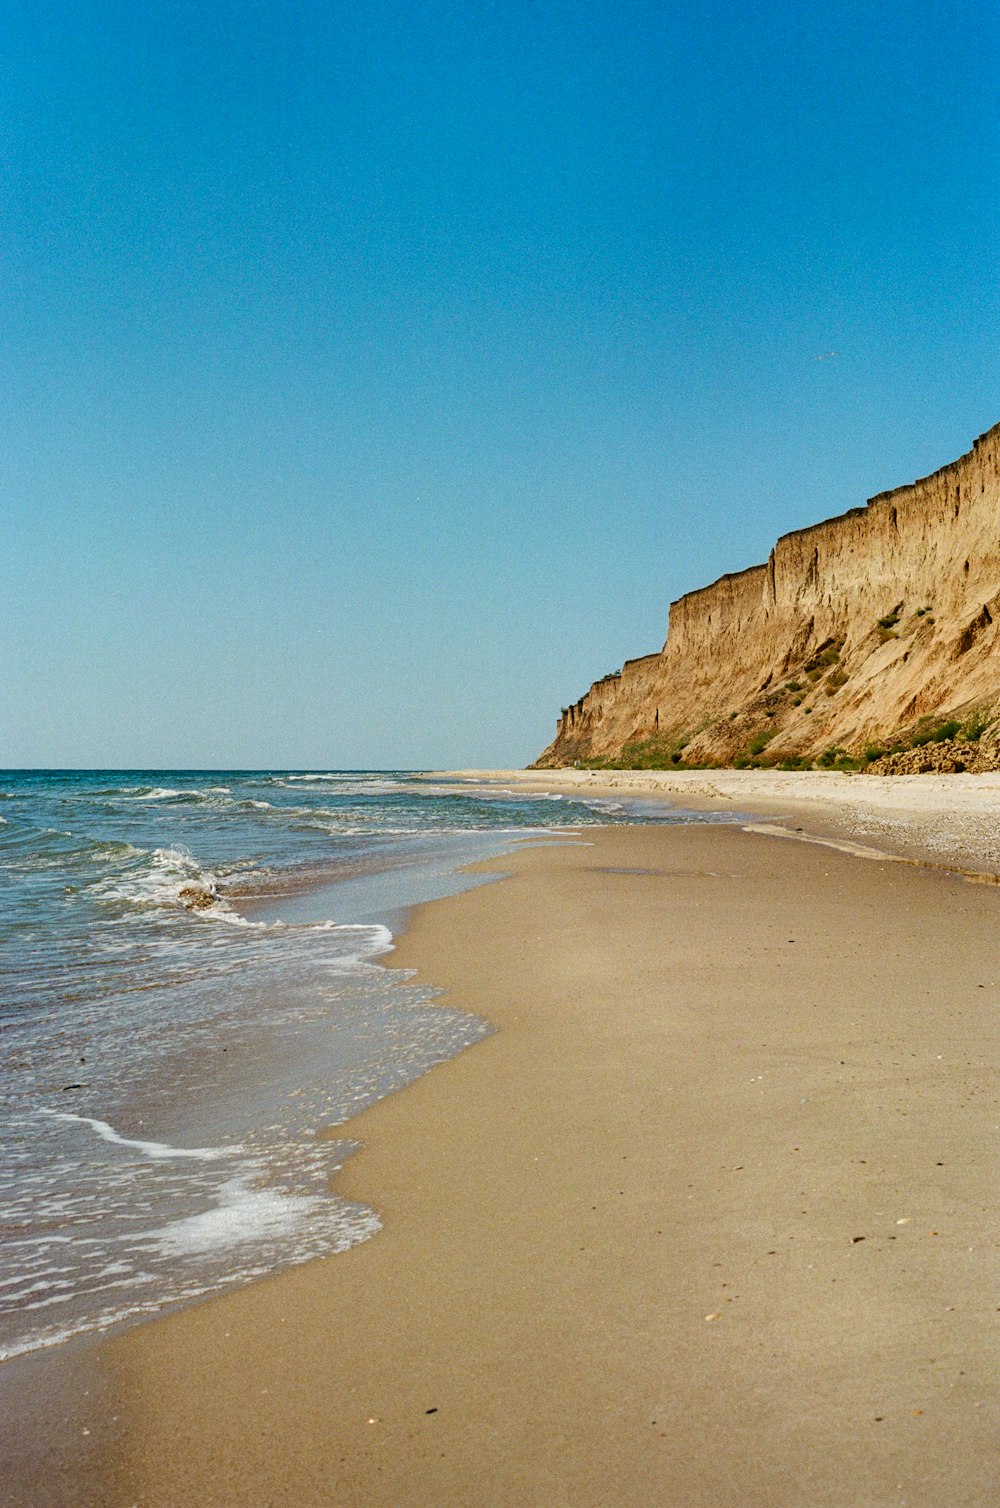 a sandy beach next to a cliff on a clear day